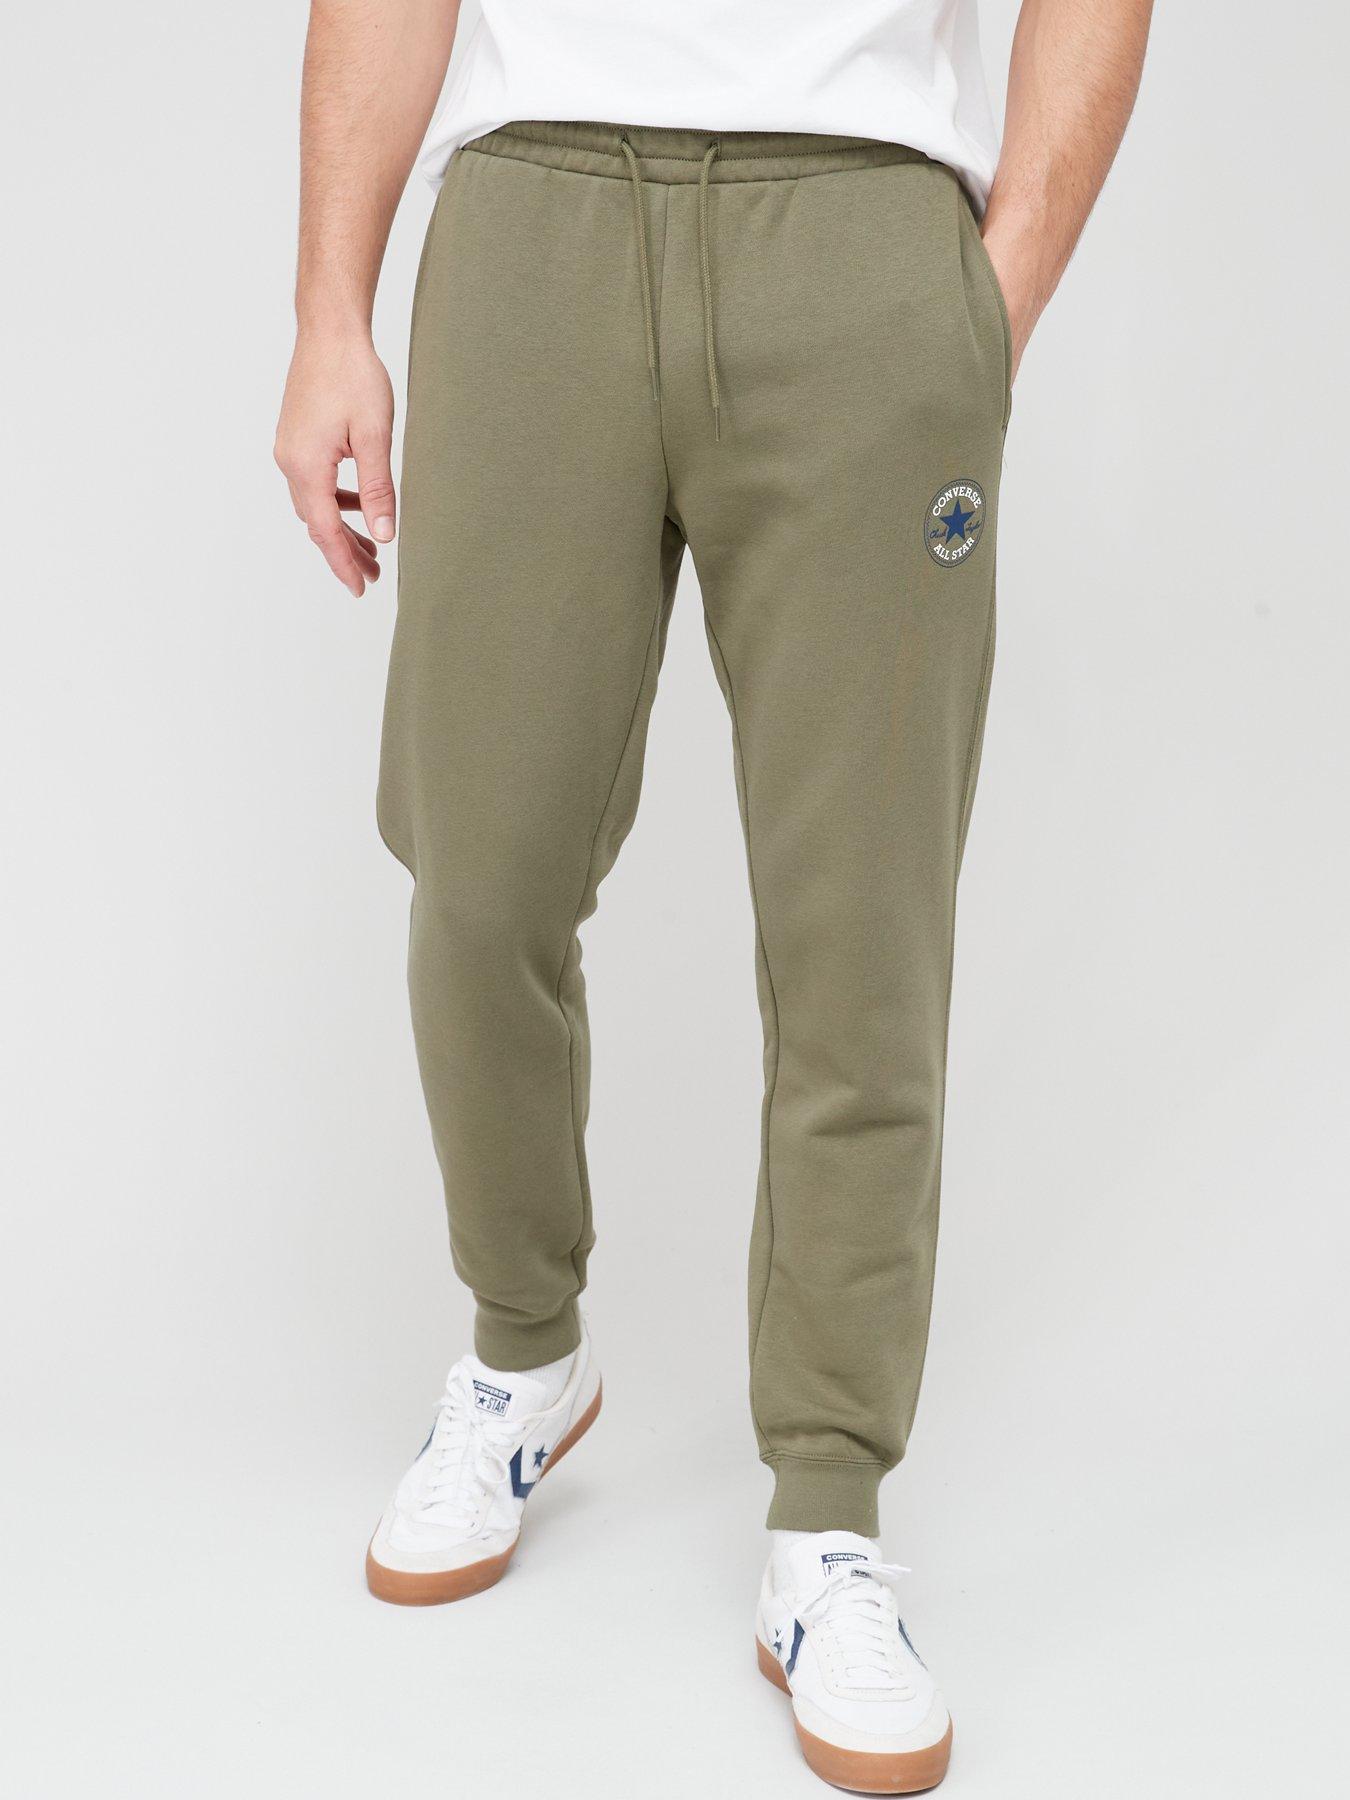 Hollywood Energize sjældenhed Converse | Jogging bottoms | Mens sports clothing | Sports & leisure | Very  Ireland